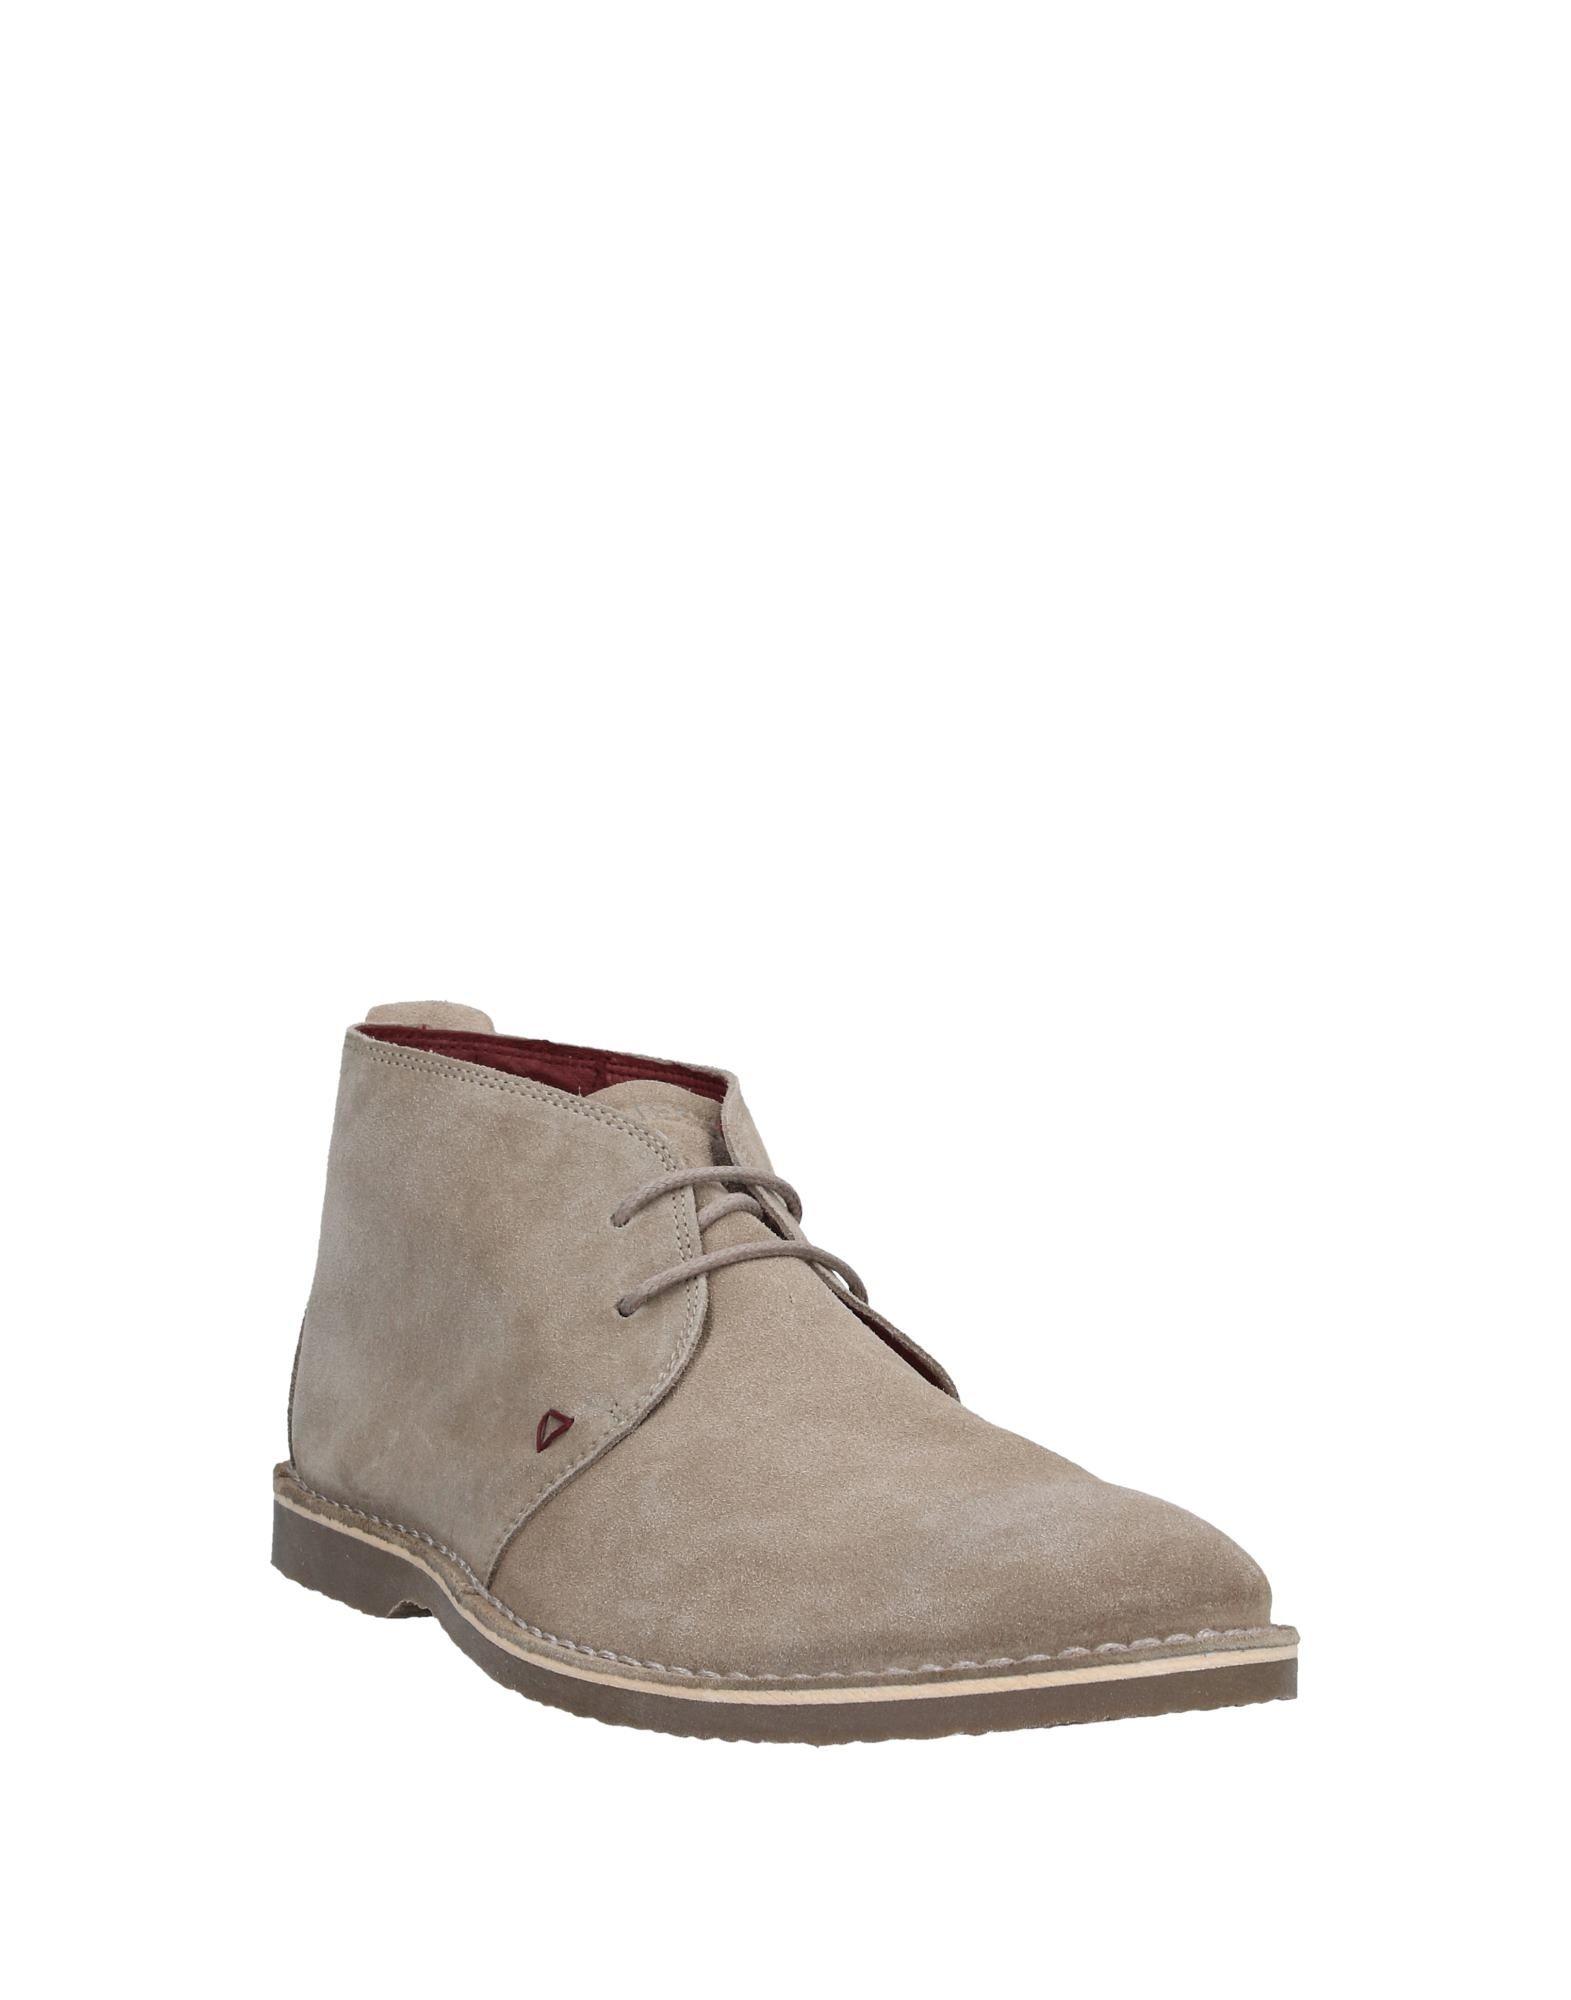 Guess Suede Ankle Boots in Beige (Natural) for Men - Lyst